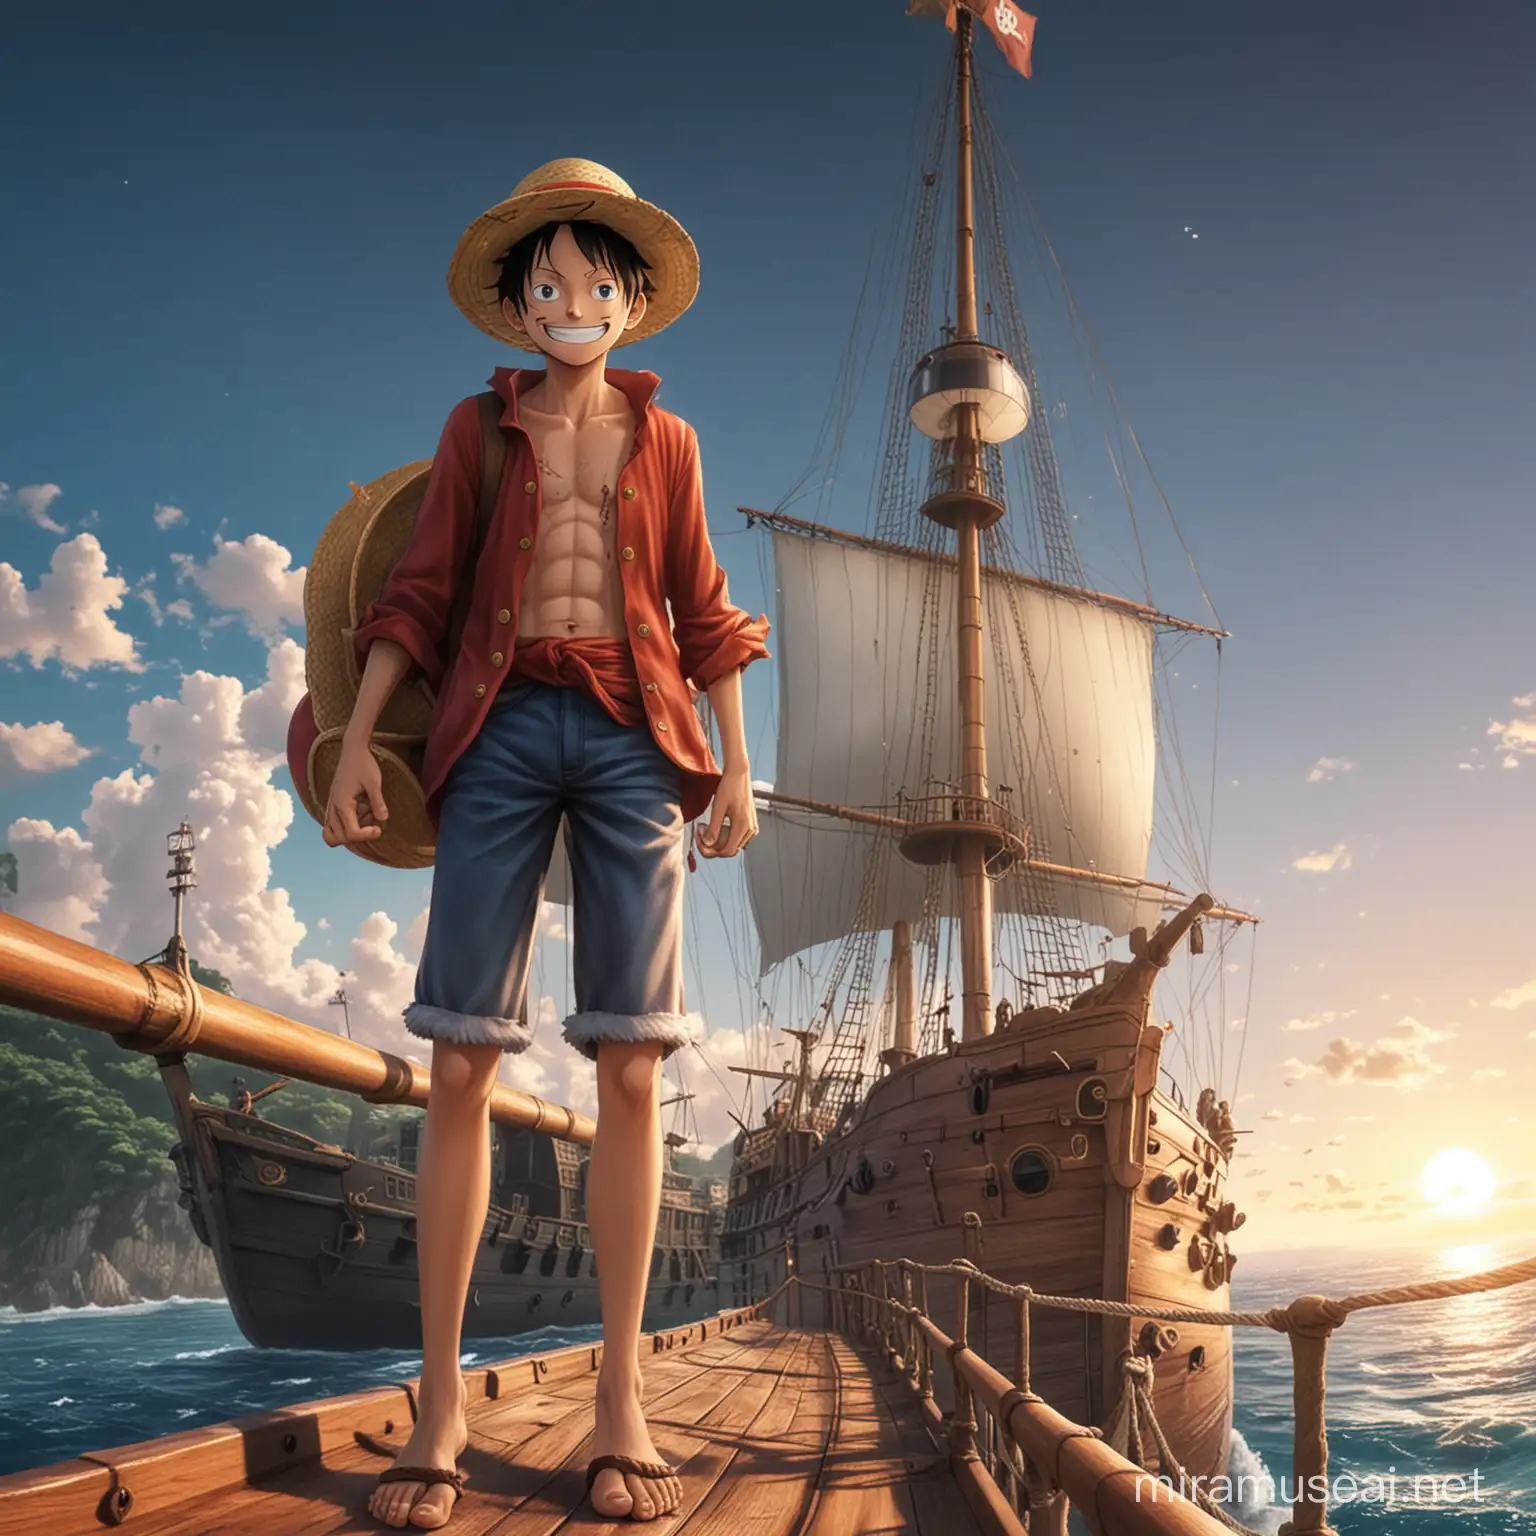 Luffy Discovers a Treasure of 26886350 on the Ship